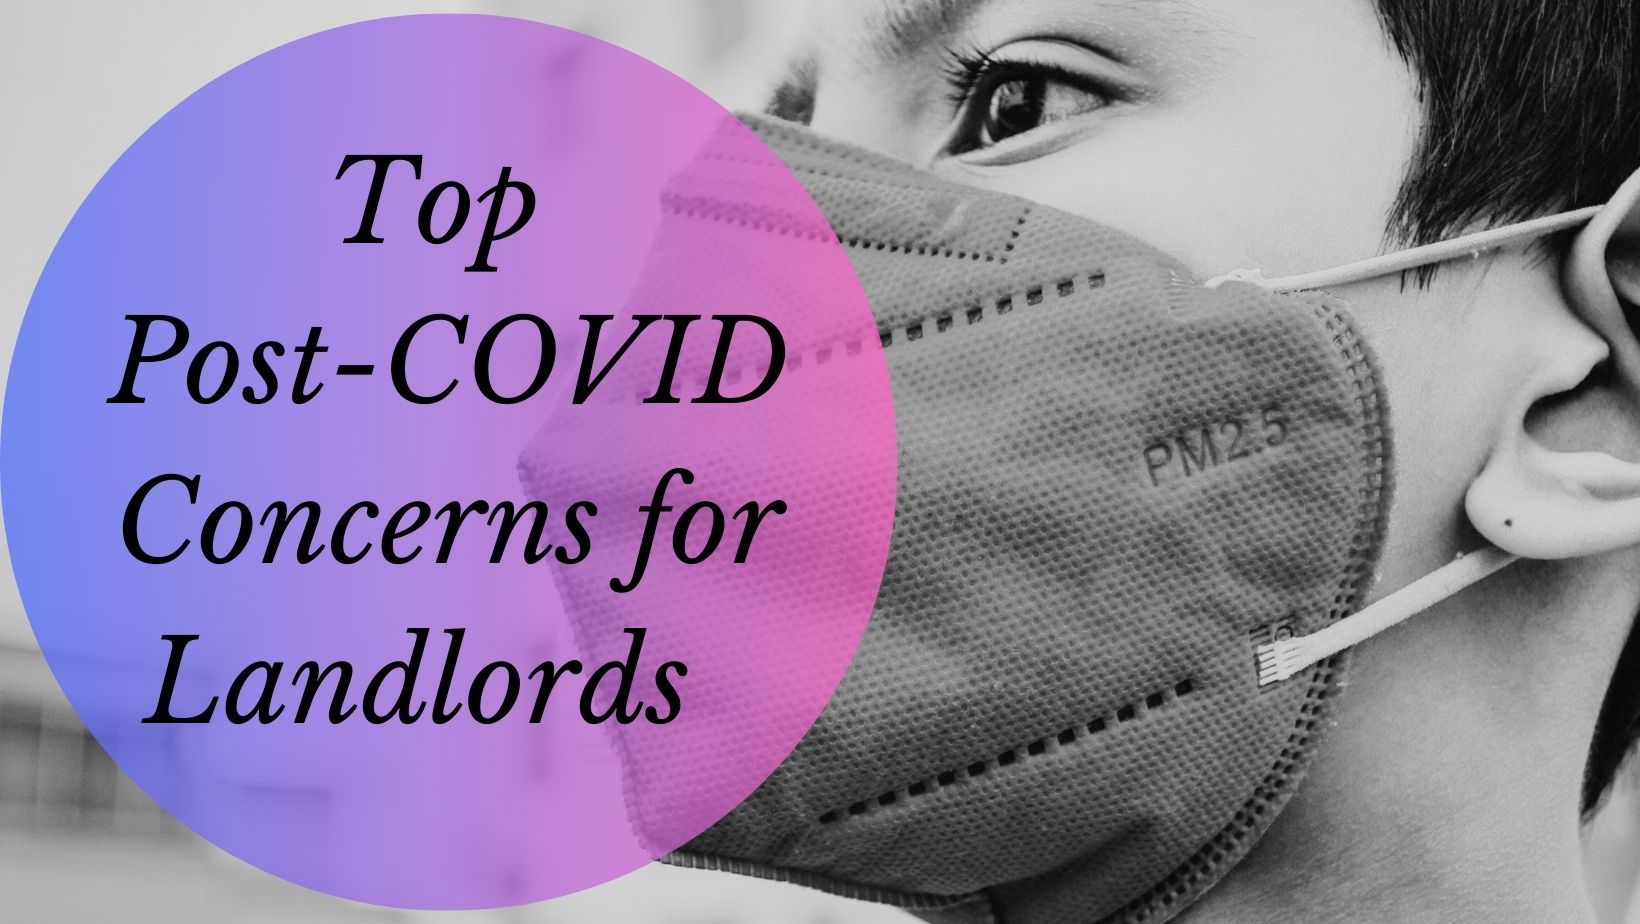 Top post-COVID concerns for landlords